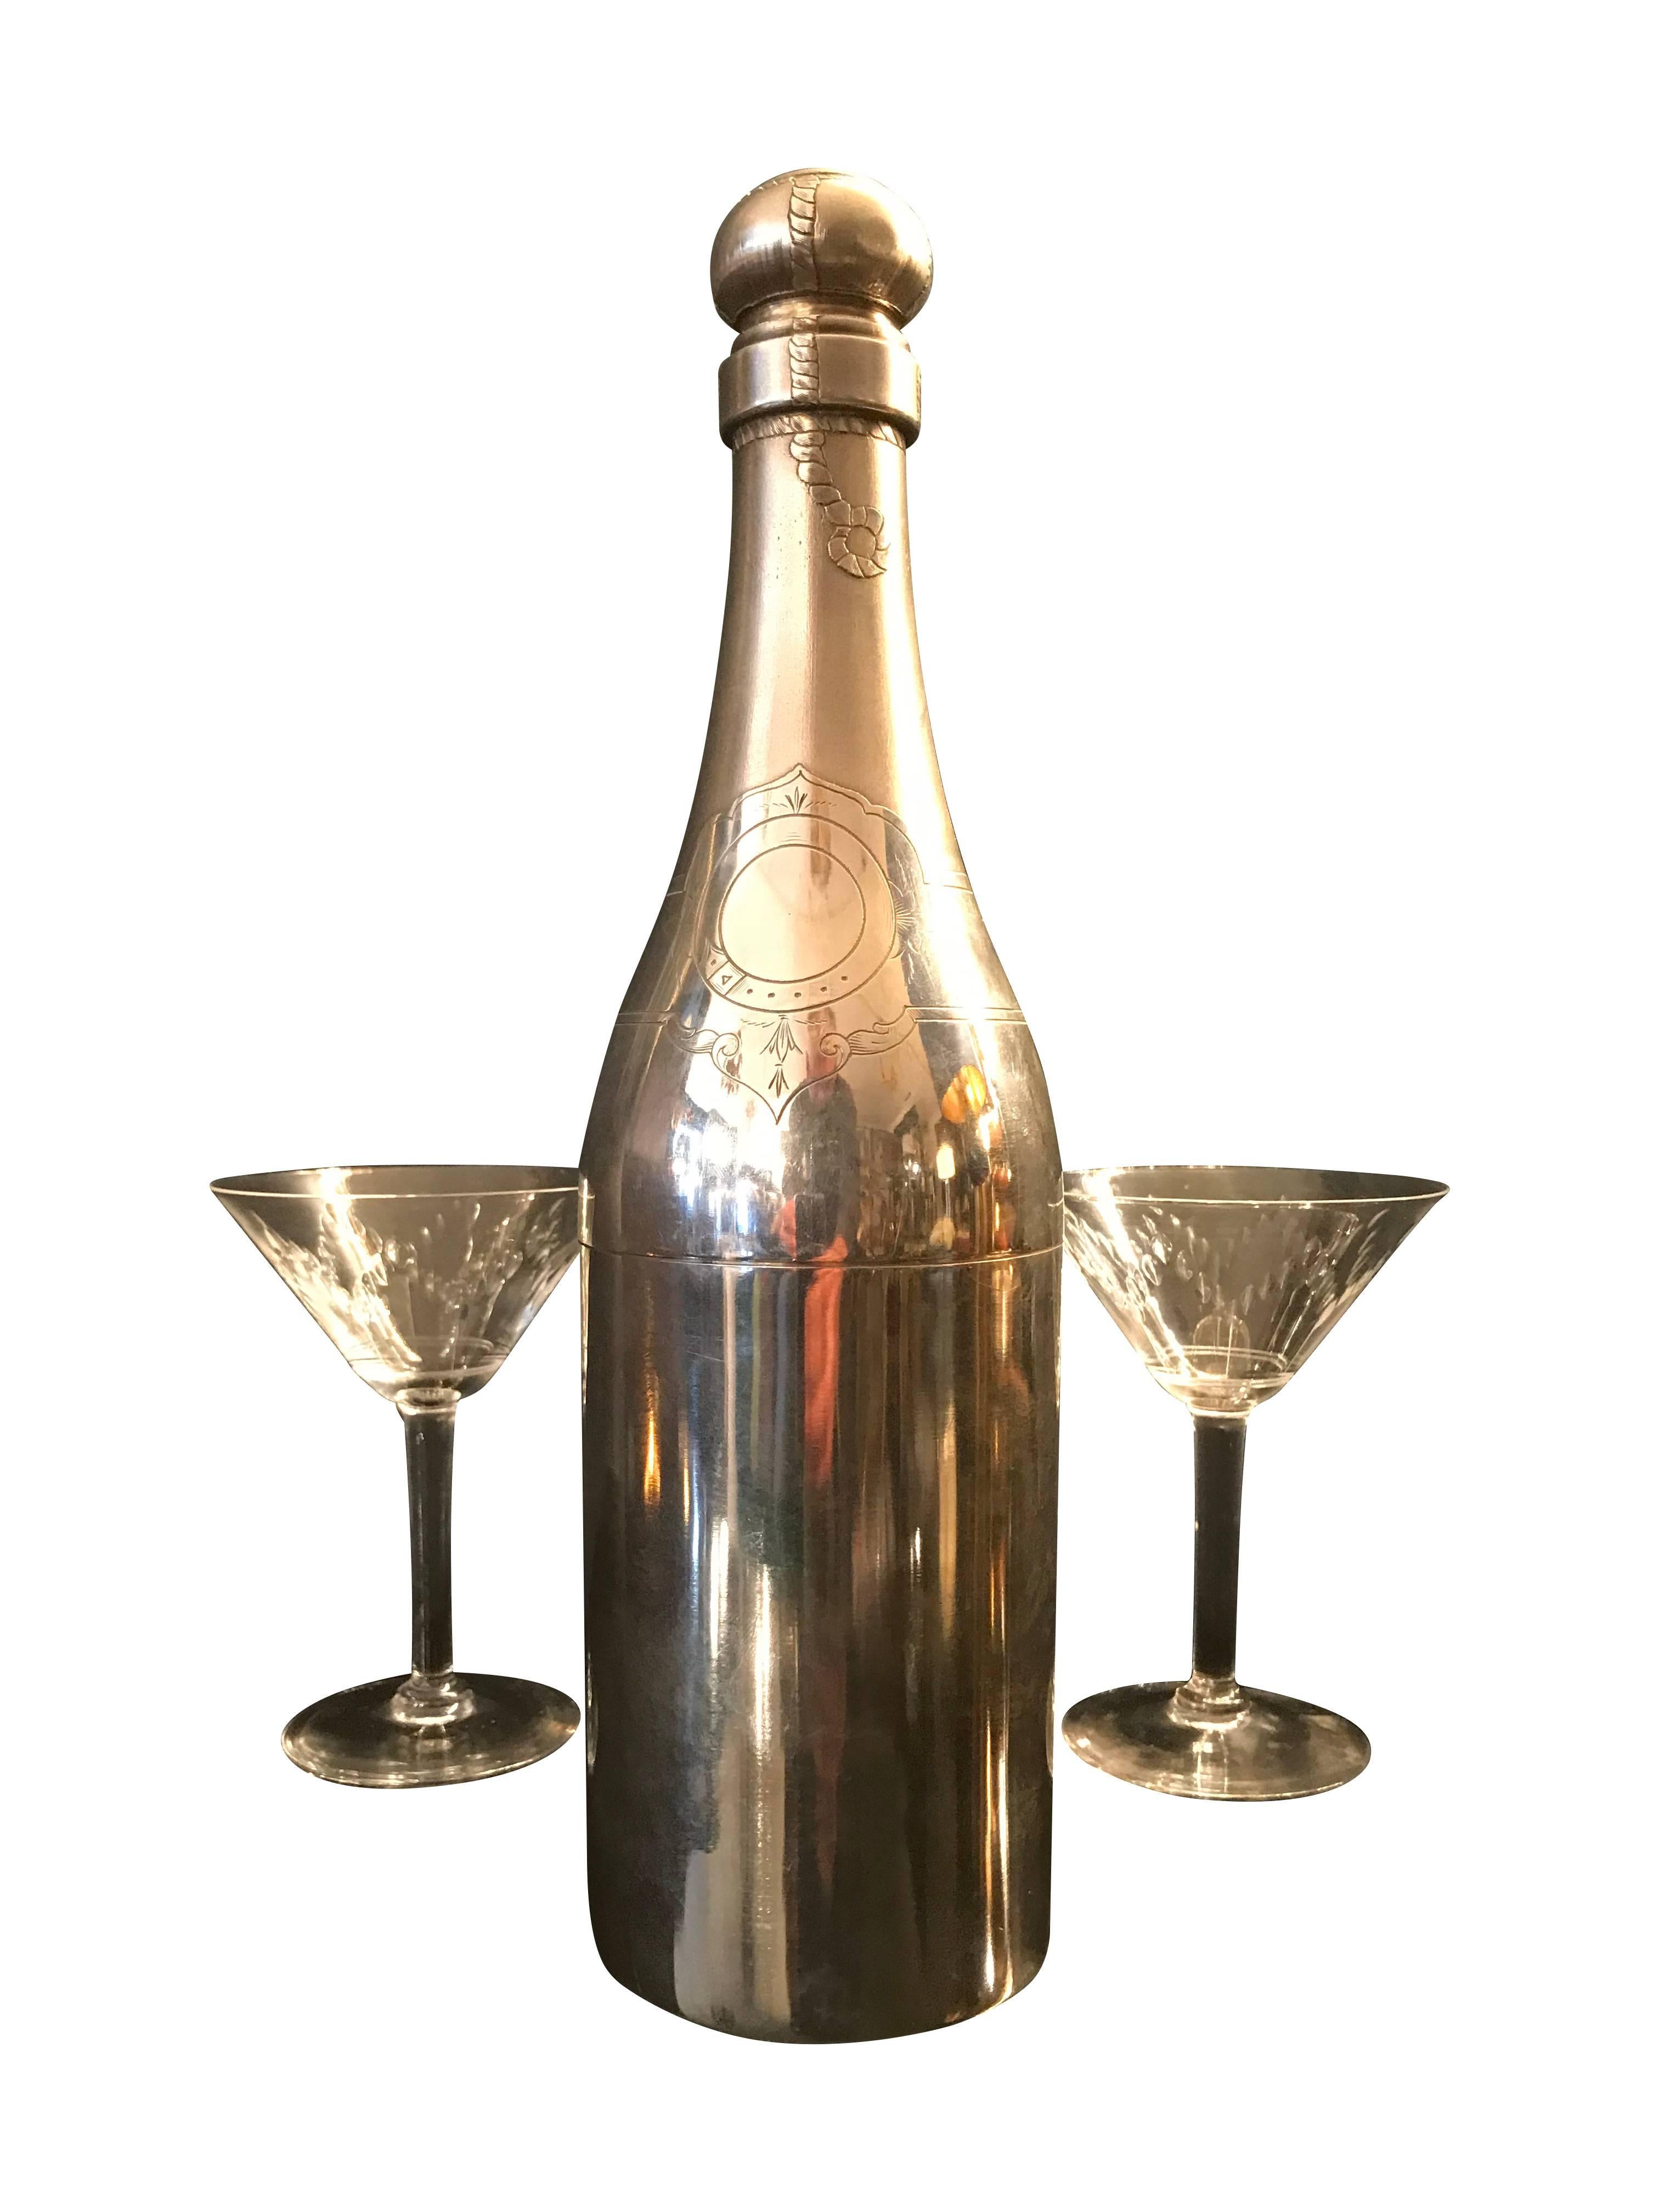 A rare silver plated Champagne bottle cocktail shaker with engraved label, foil and cork wire detail. The Shaker separates in just below the shoulder to fill with ice and cocktail mix and the cork comes off to pour the cocktail through the top